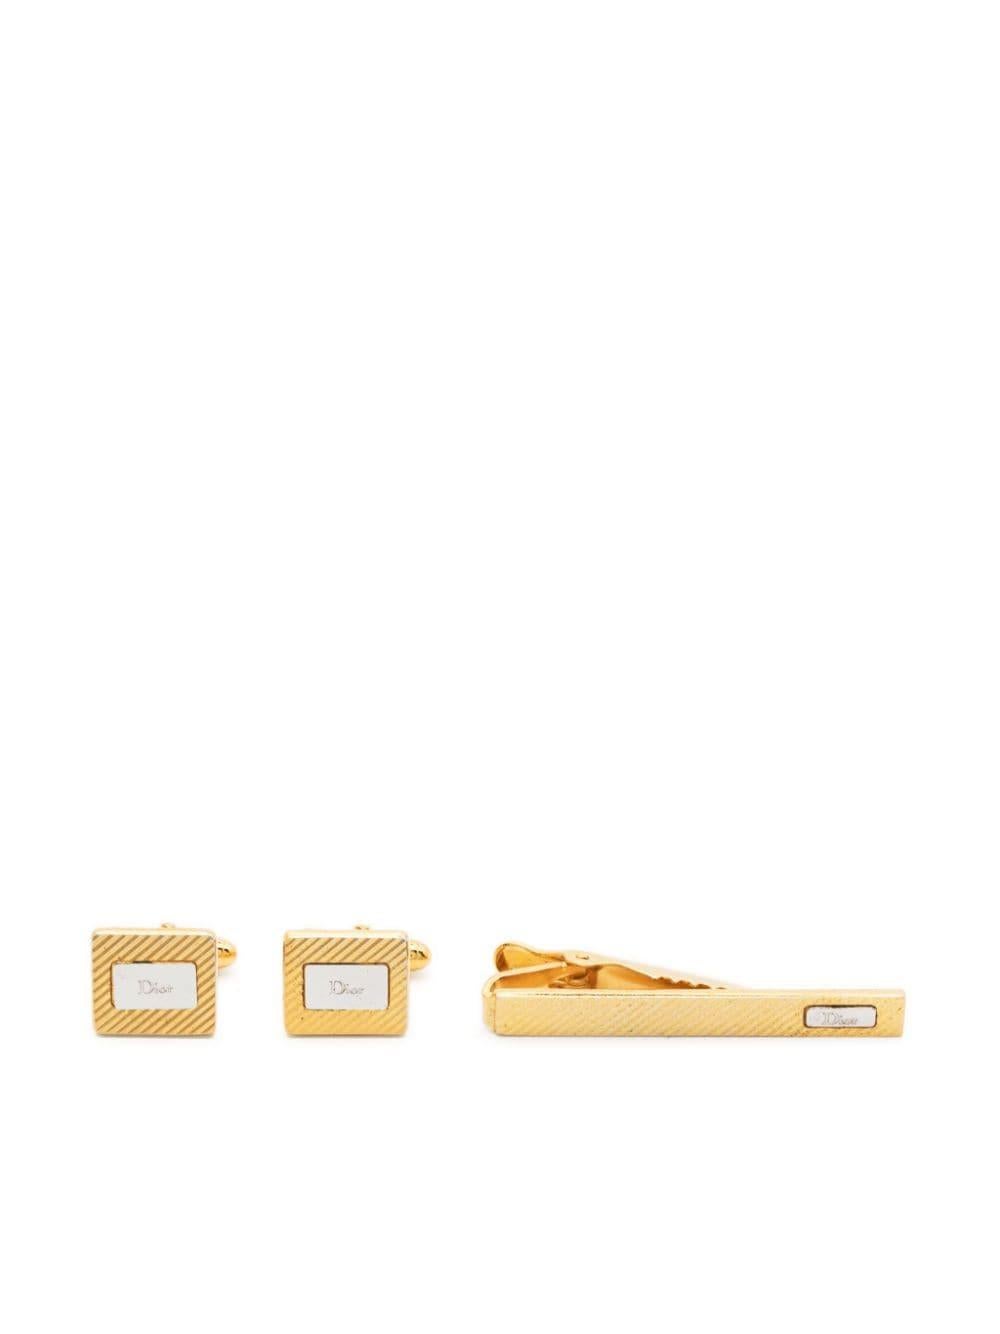 Christian Dior gold-tone tie clip and cufflinks set featuring logo-stamp square design, twist-lock fastening, a polished finishing. 
The  tie clip  featuring clip fastening, embossed logo to the front and engraved logo at the back.
In good vintage